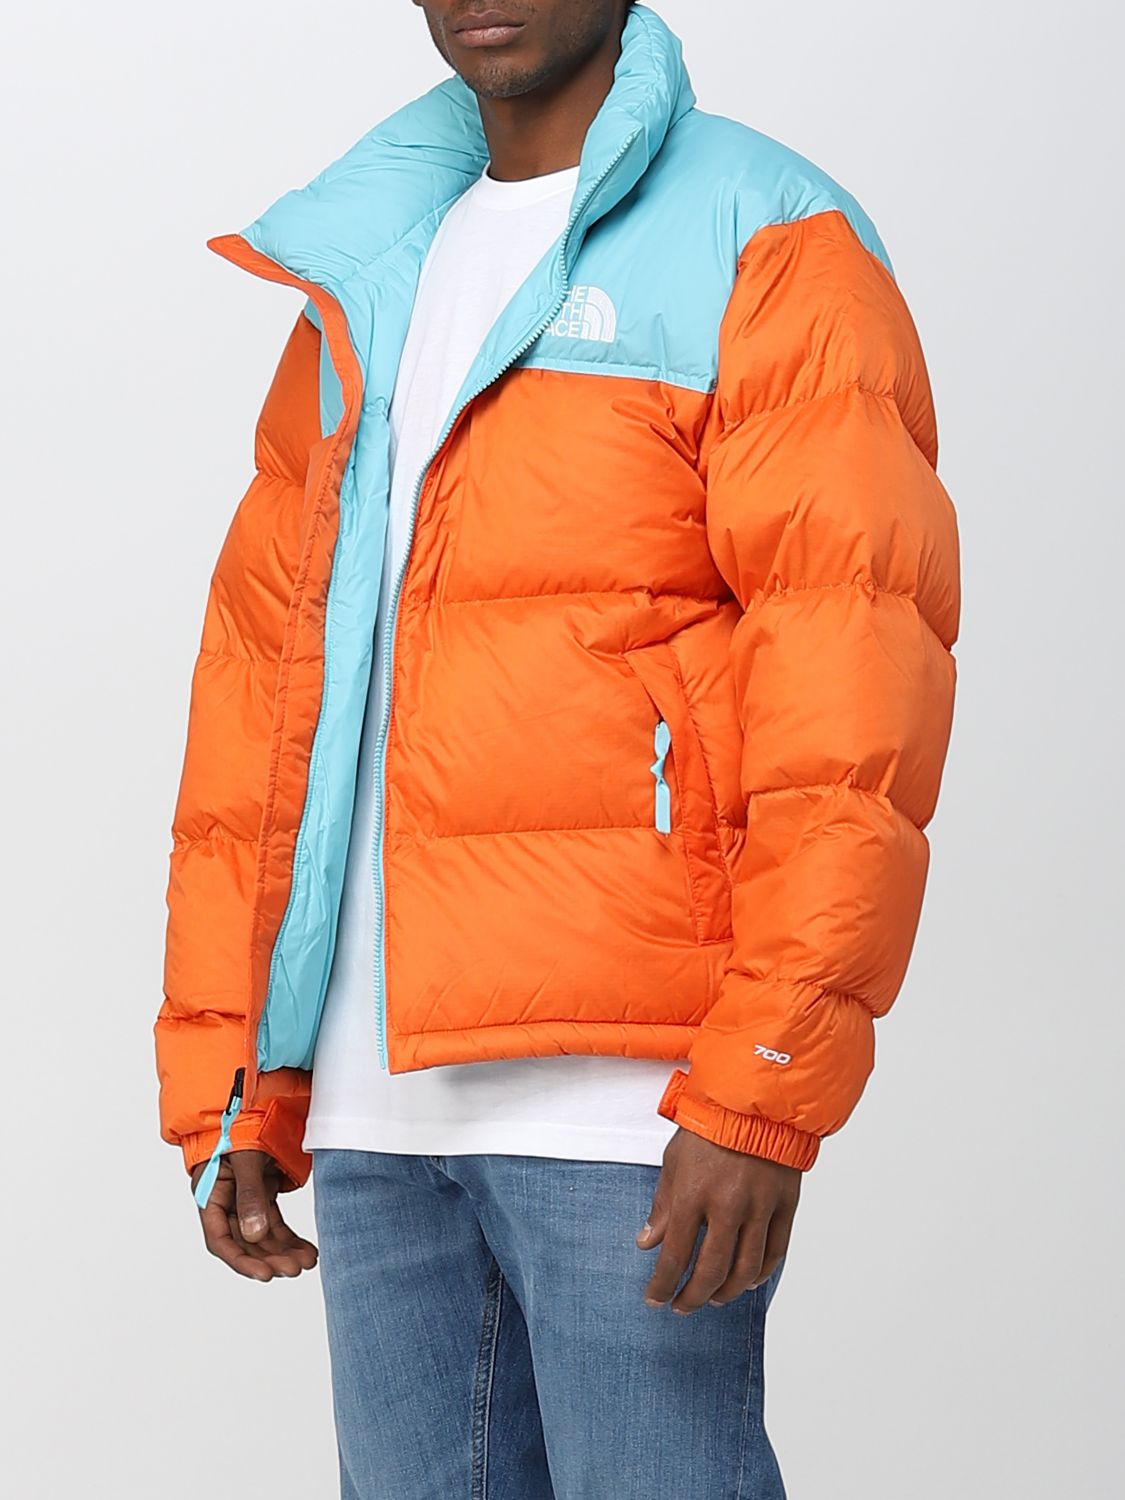 THE NORTH FACE jacket for men Orange The North Face jacket